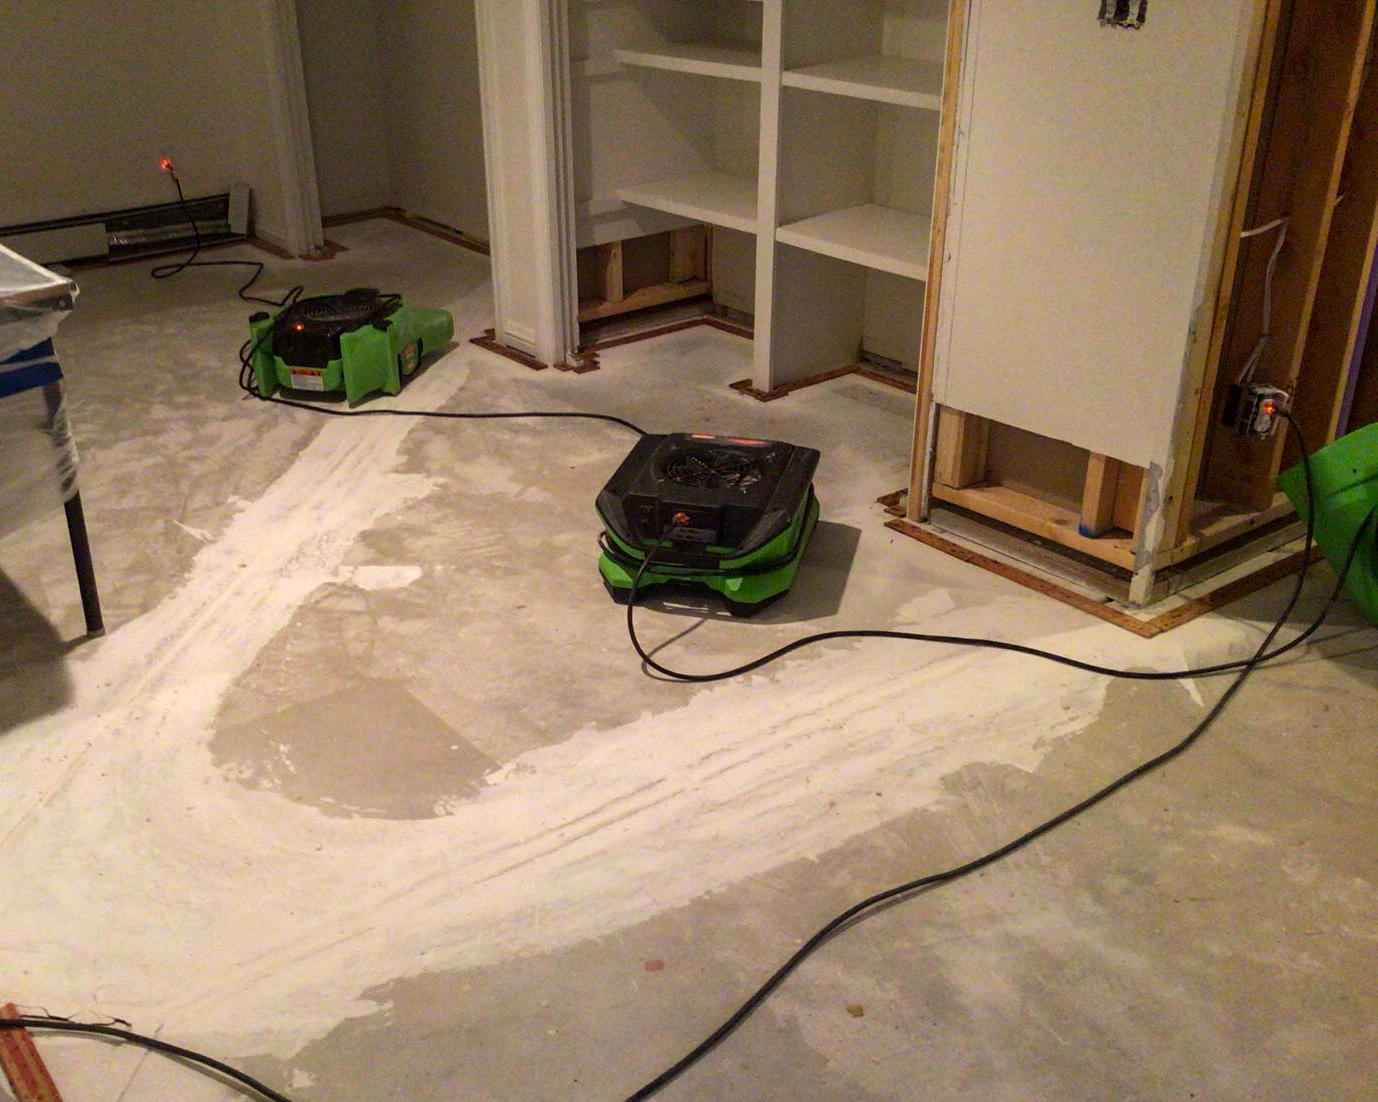 SERVPRO of Yavapai County will respond quickly to your water or flood damage event.